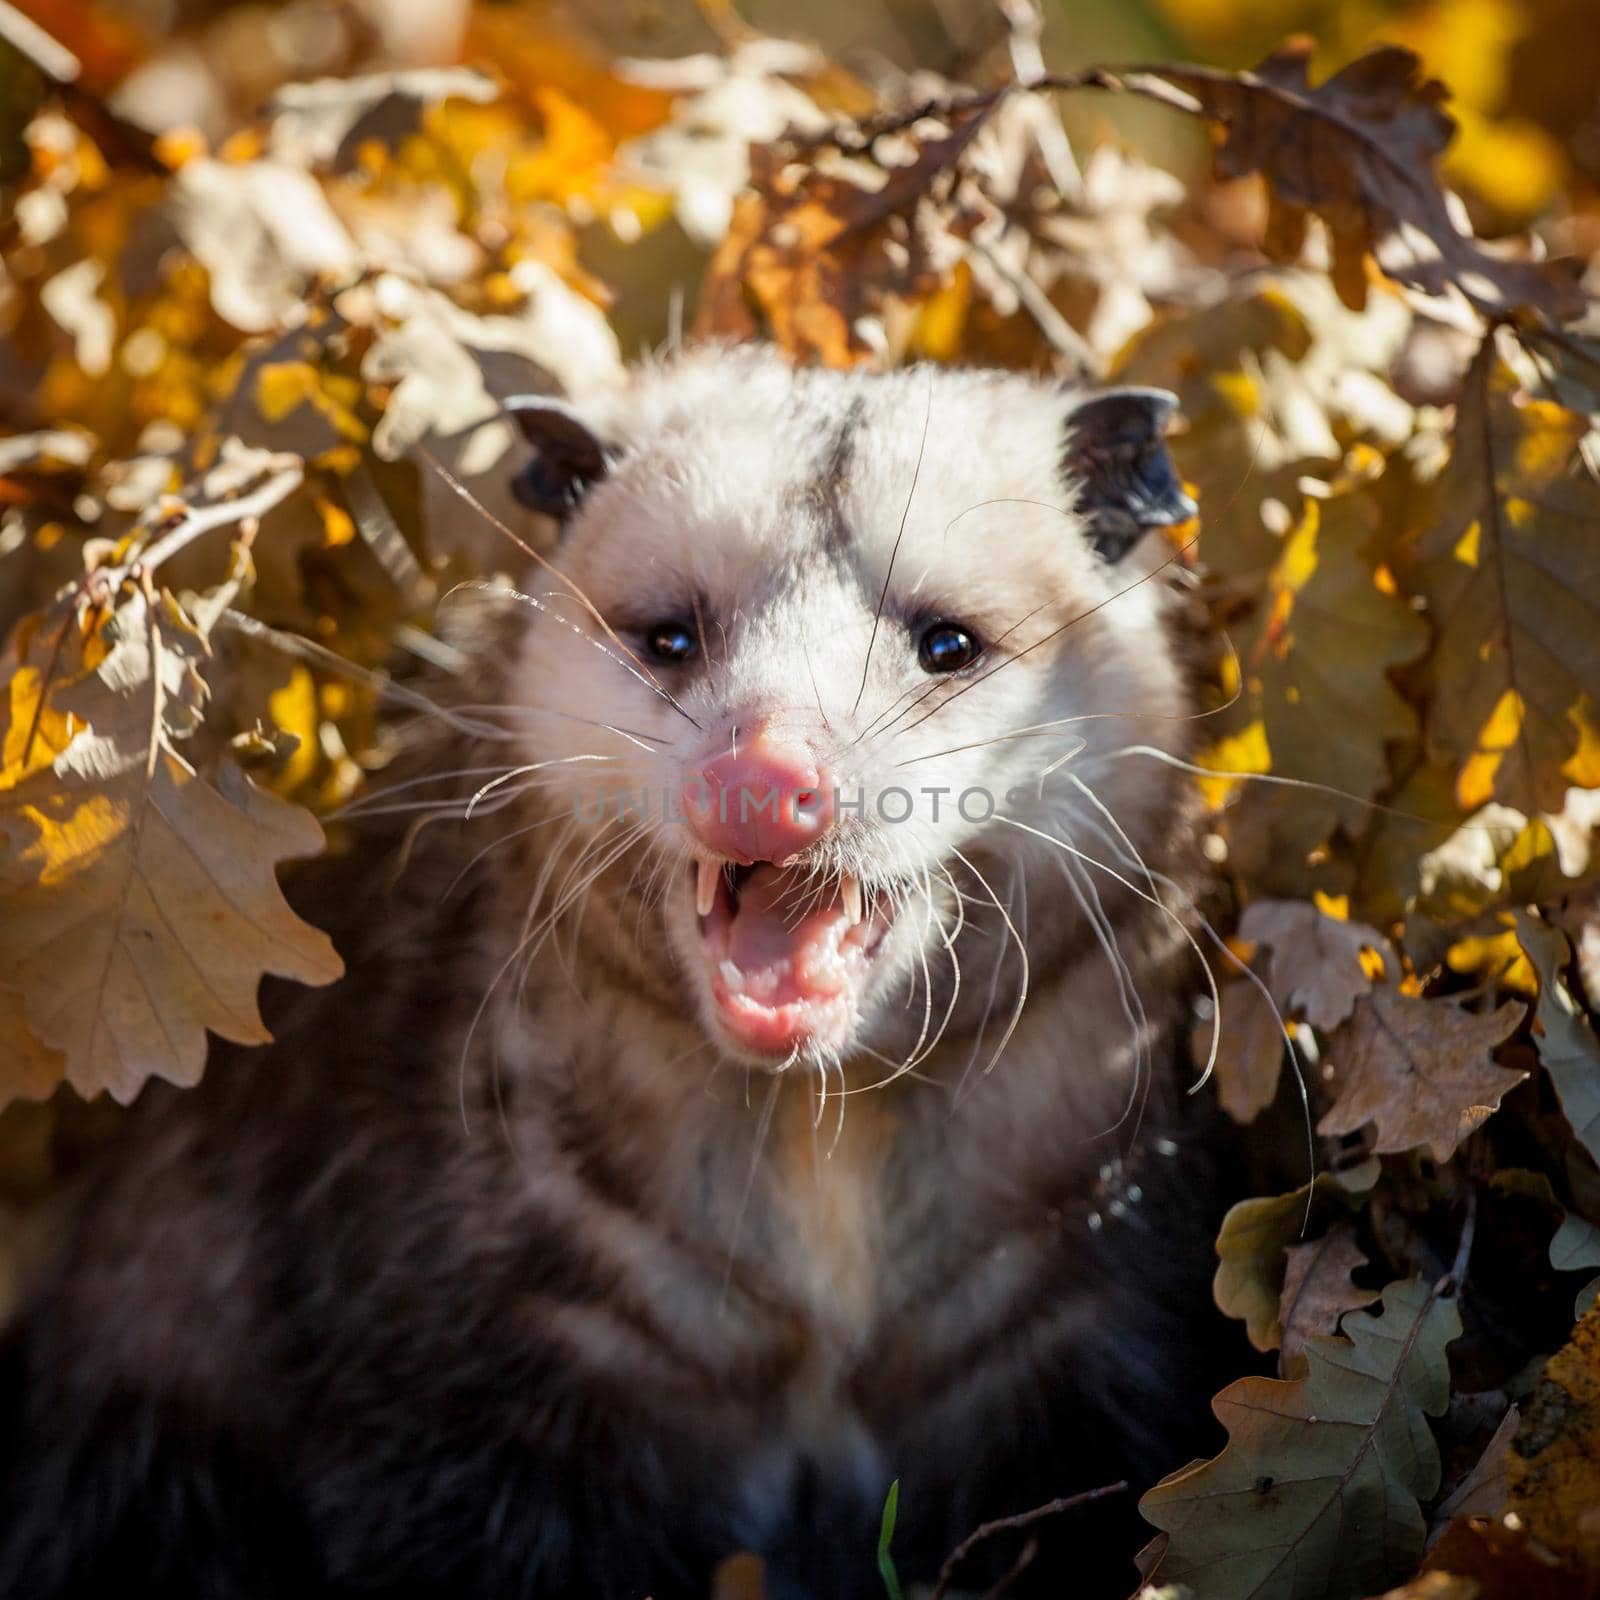 The Virginia opossum, Didelphis virginiana, in autumn park by RosaJay